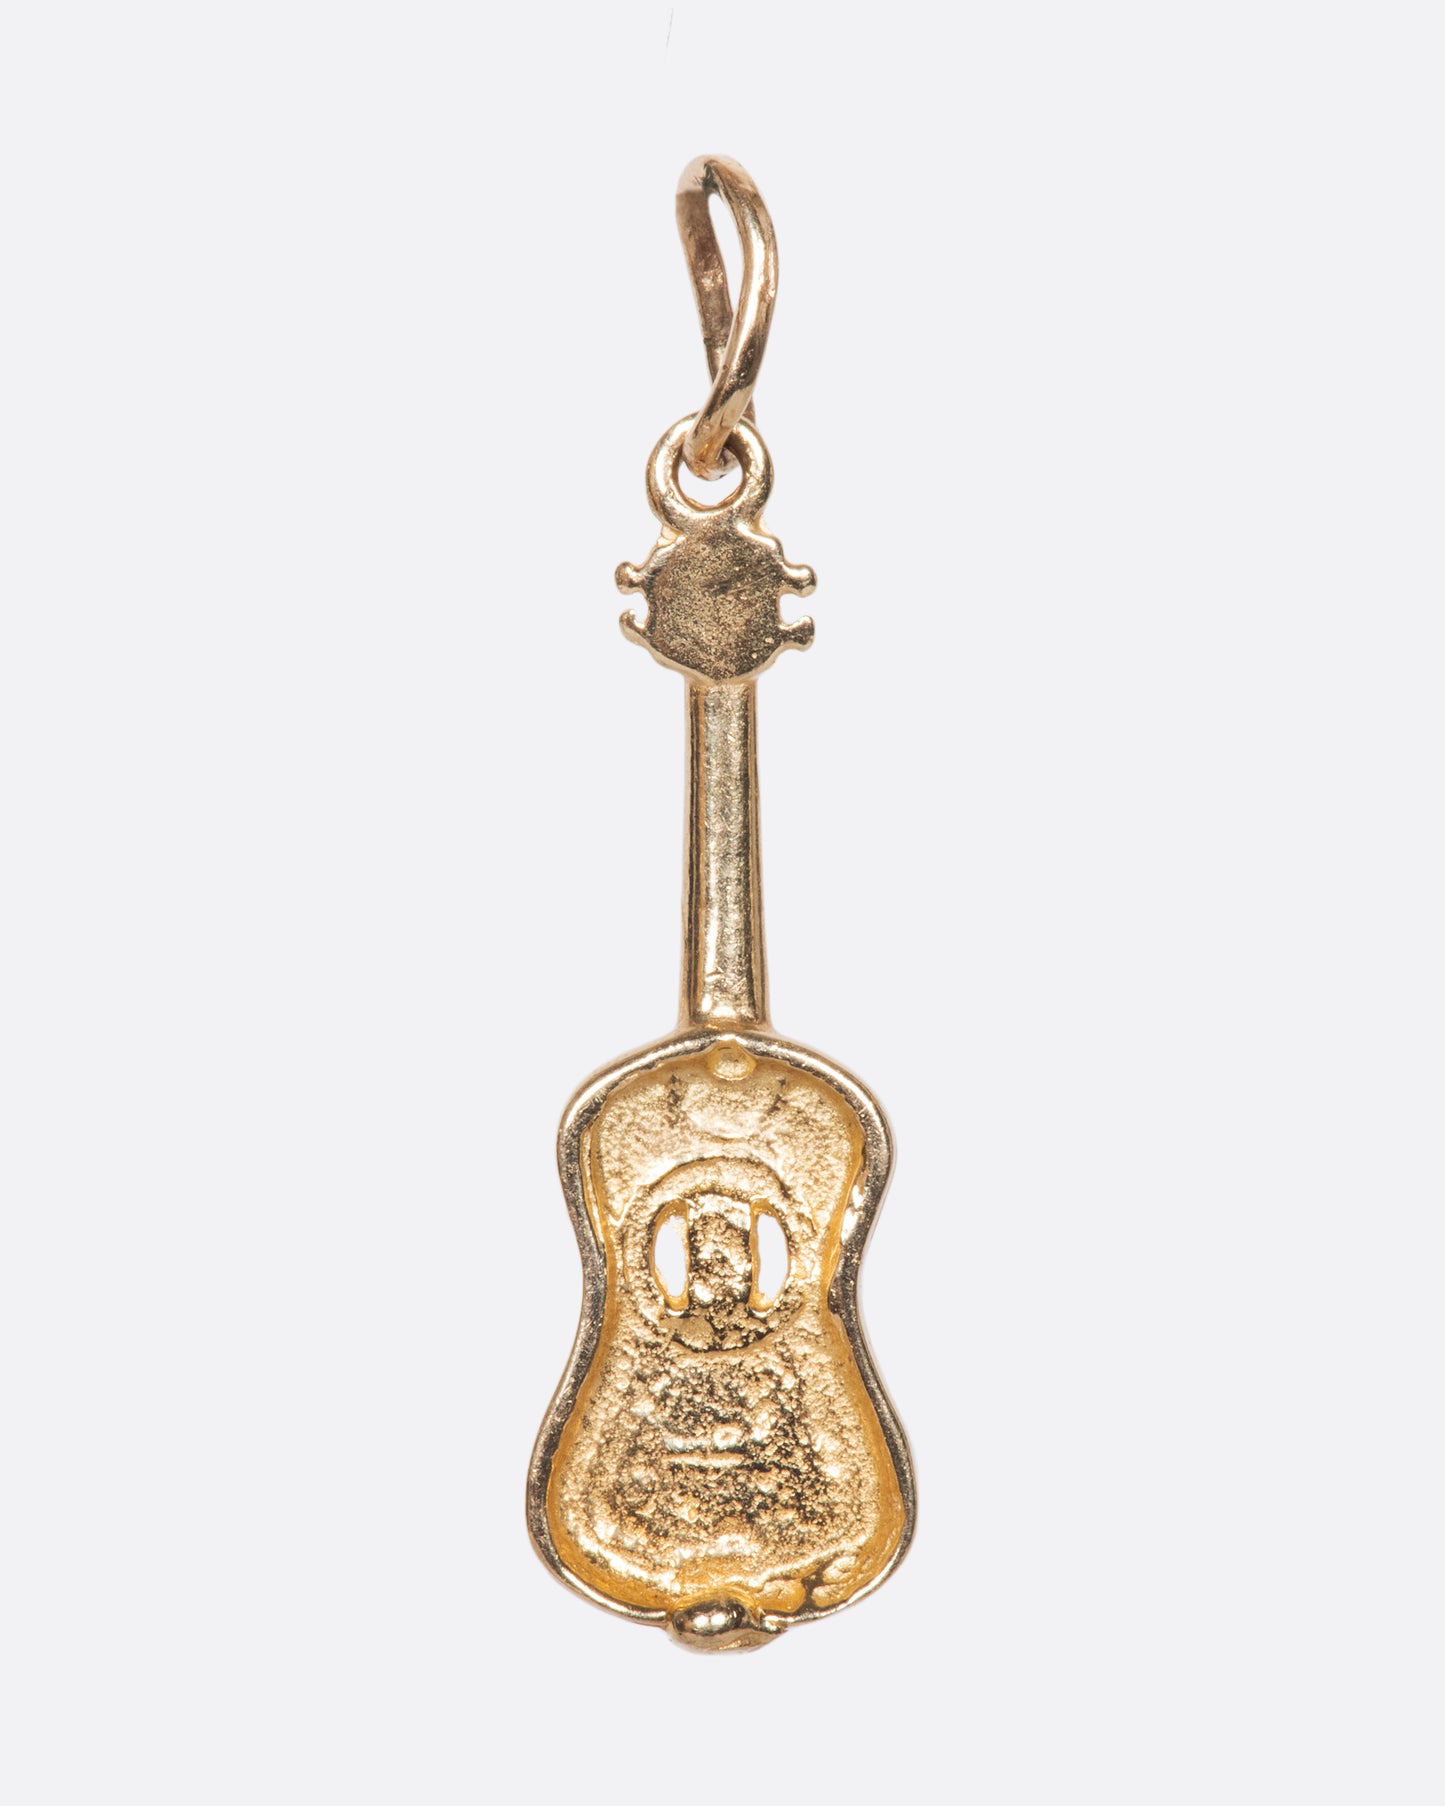 We love the incredible detail in this vintage yellow gold guitar charm, complete with a hollowed out sound hole